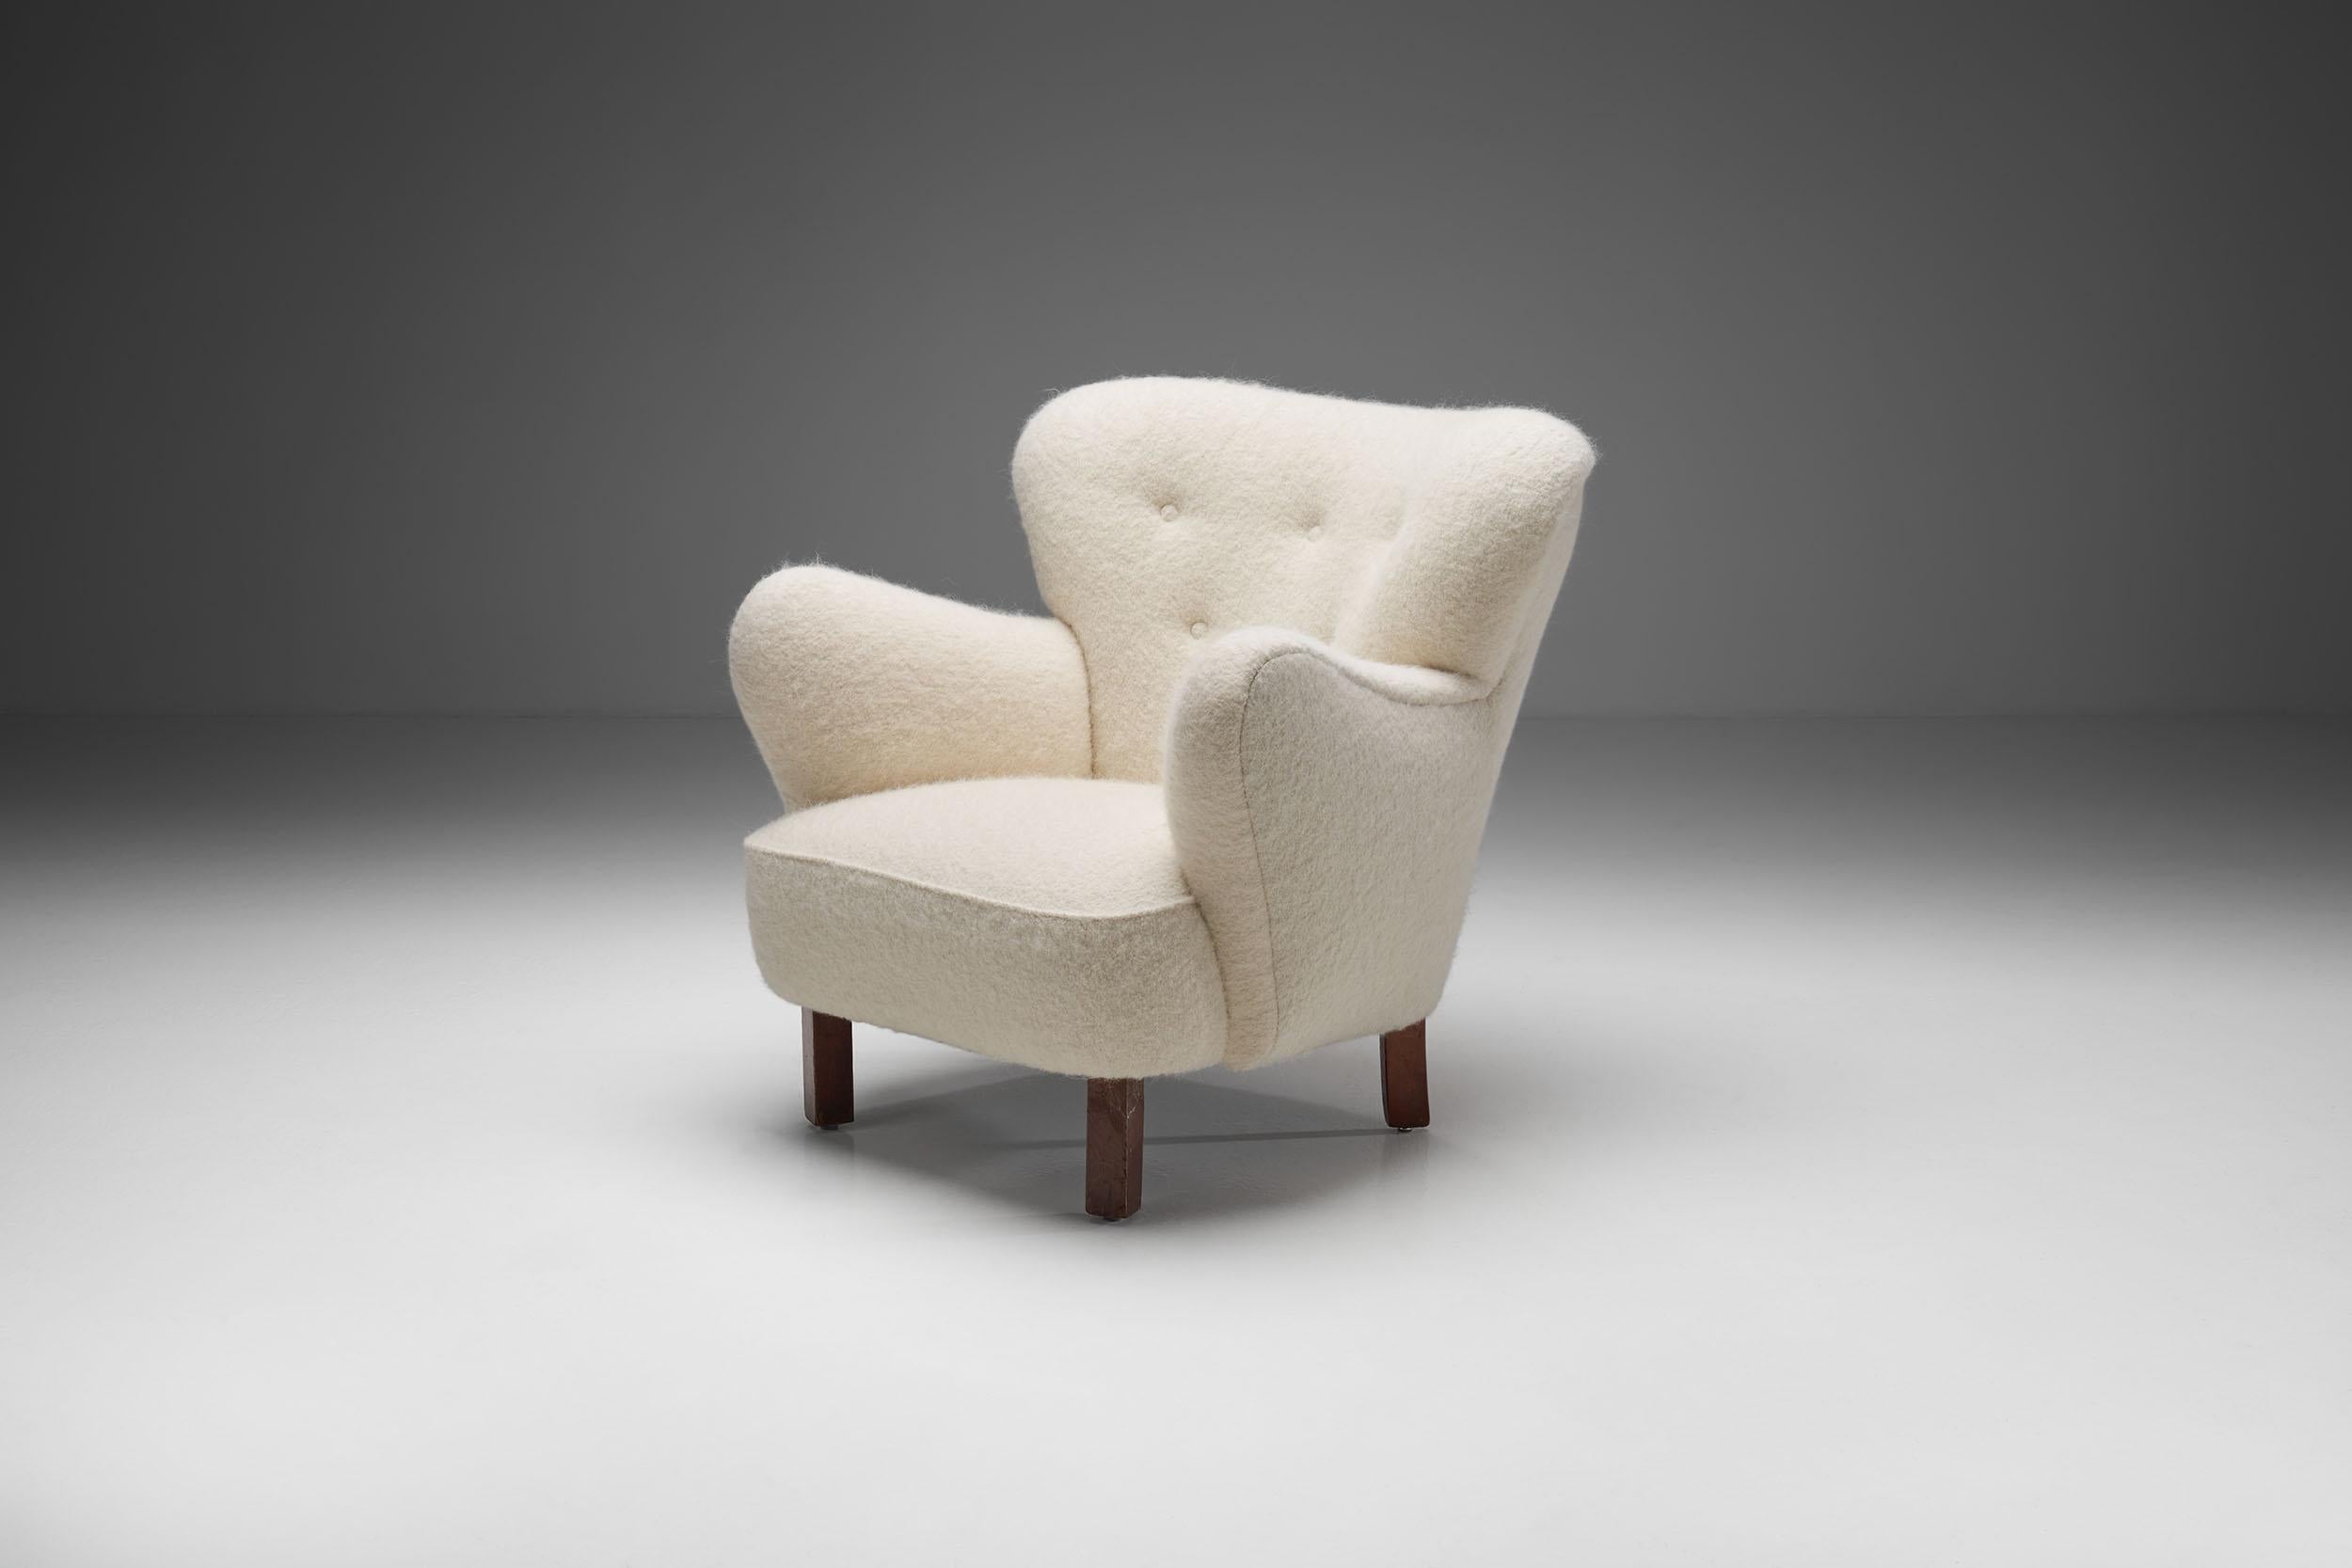 This unique 1940s “Polar” chair is a great representation of the quality and craftsmanship of Danish master cabinetmakers and the immediately recognizable characteristics of Scandinavian design.

The slender wooden legs prevent the chair from